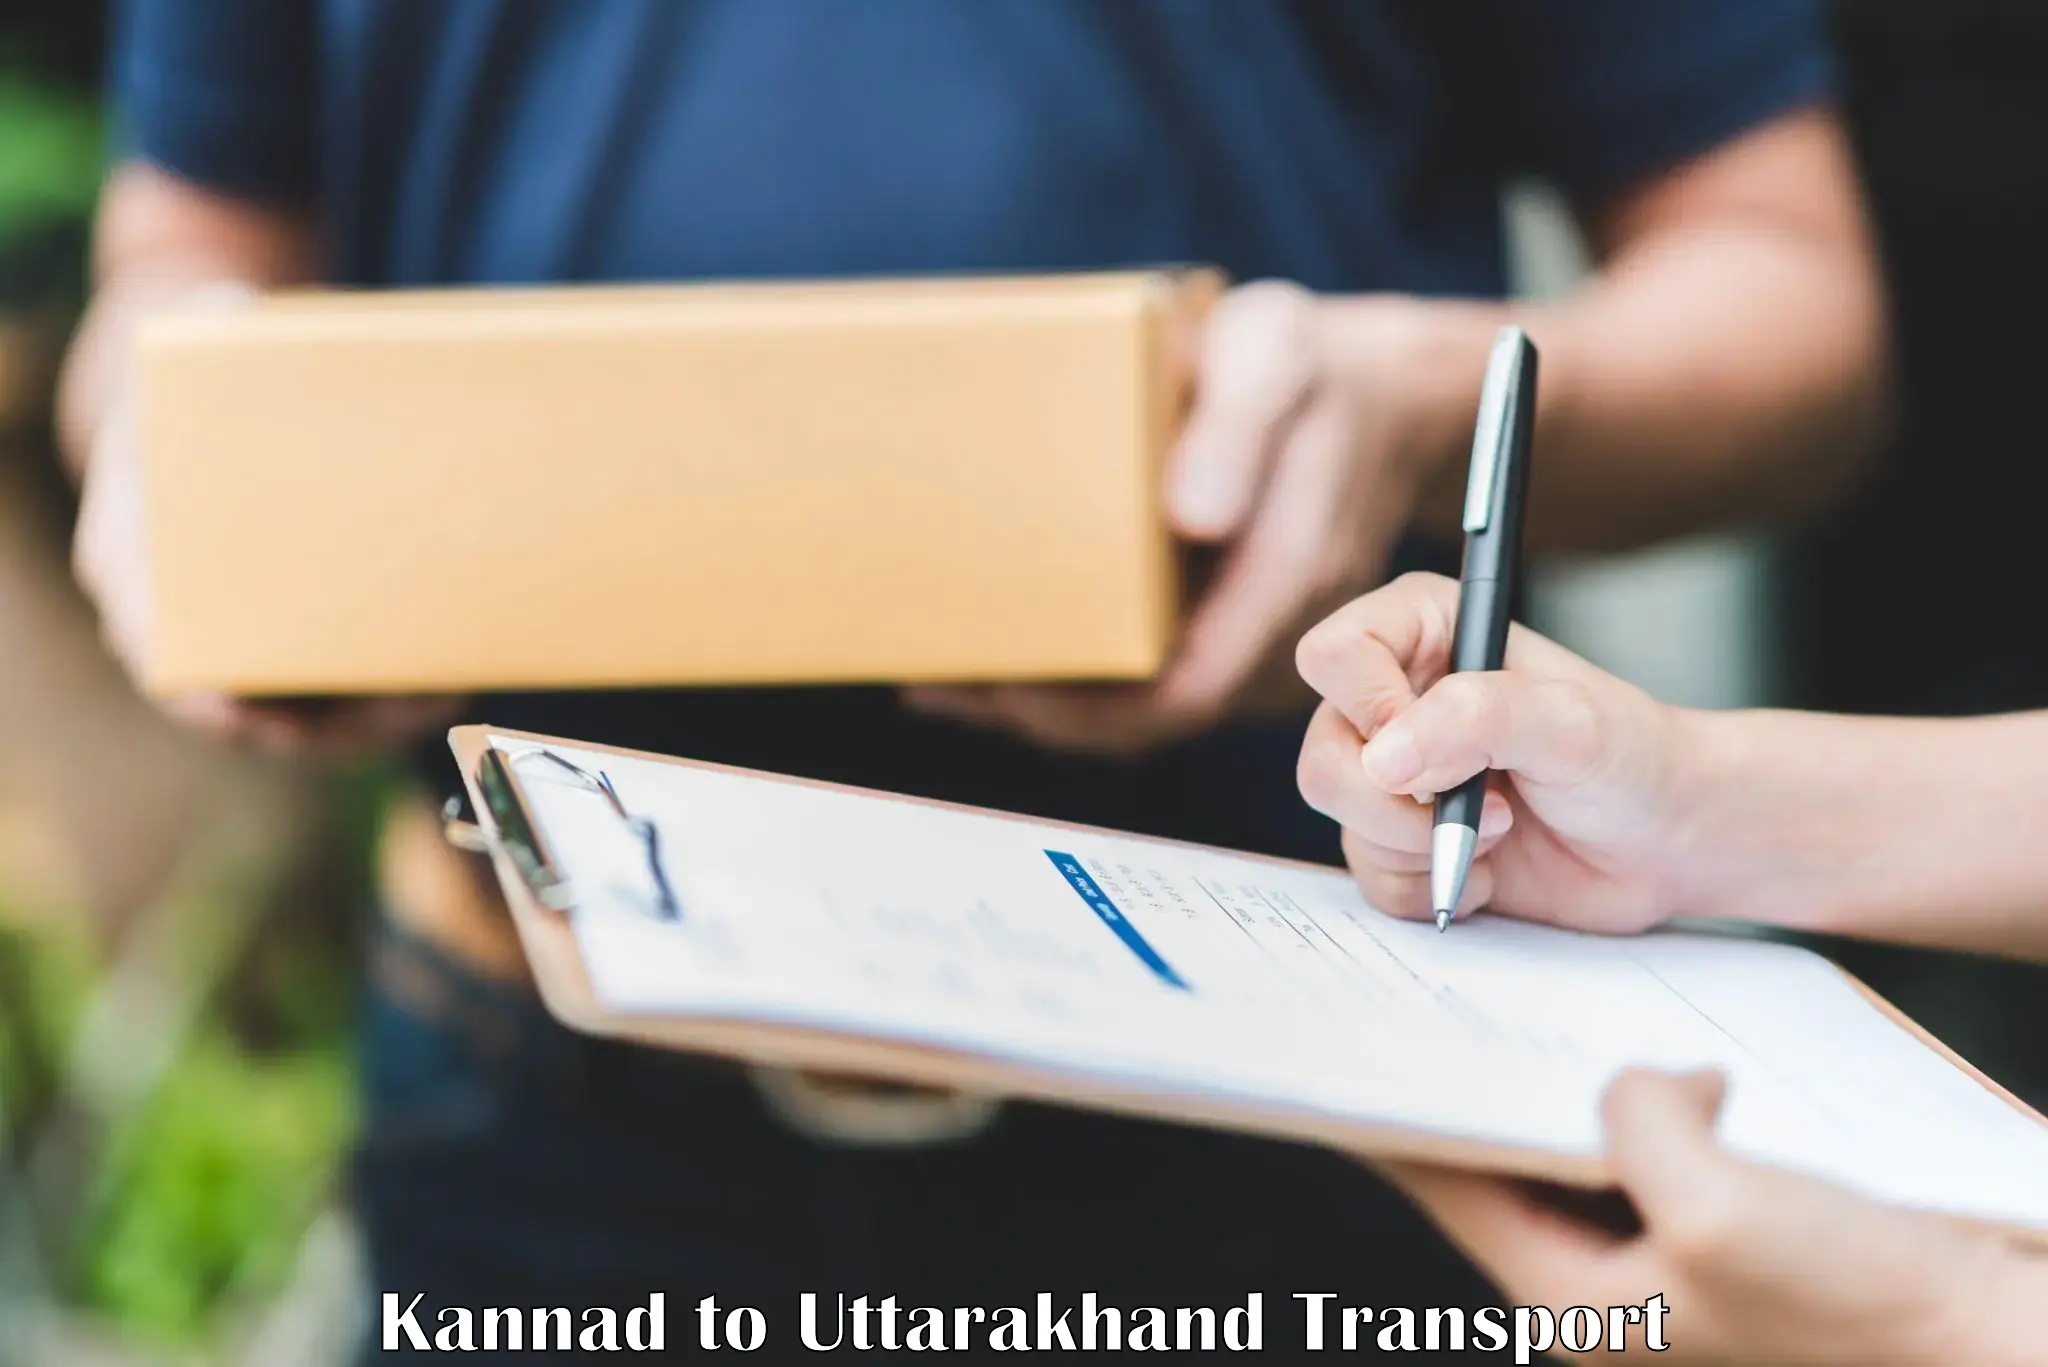 Daily parcel service transport Kannad to Lansdowne